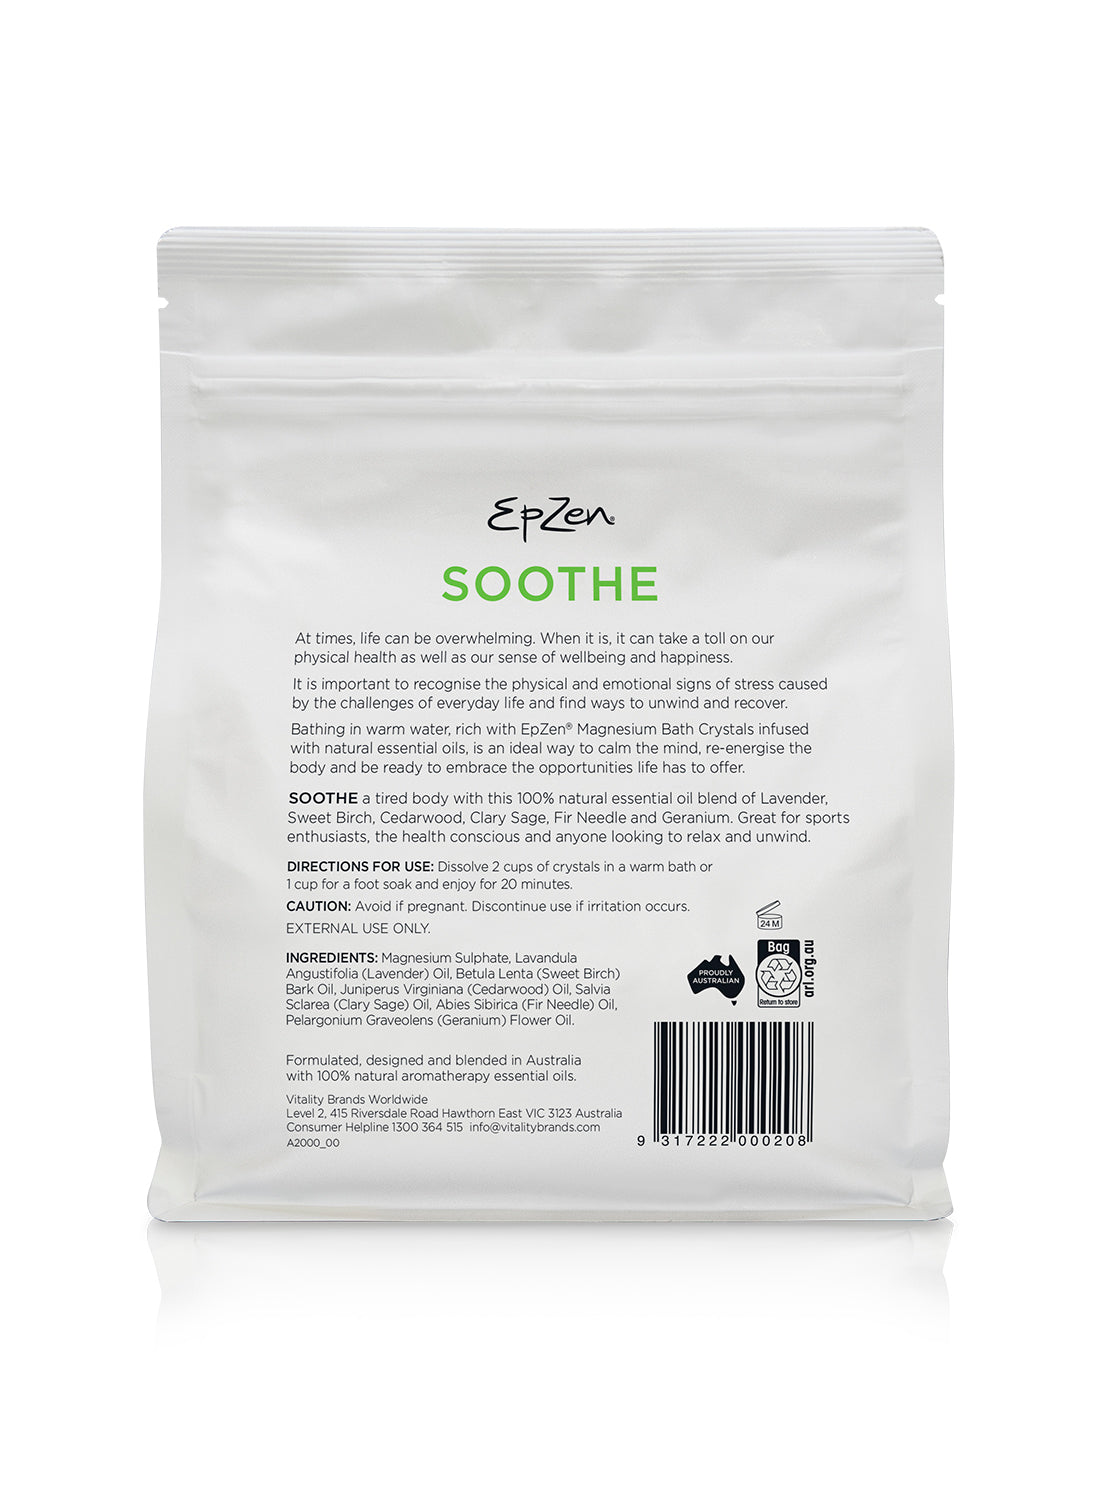 Soothe magnesium bath crystals Essential Oils The Crystal and Wellness Warehouse 